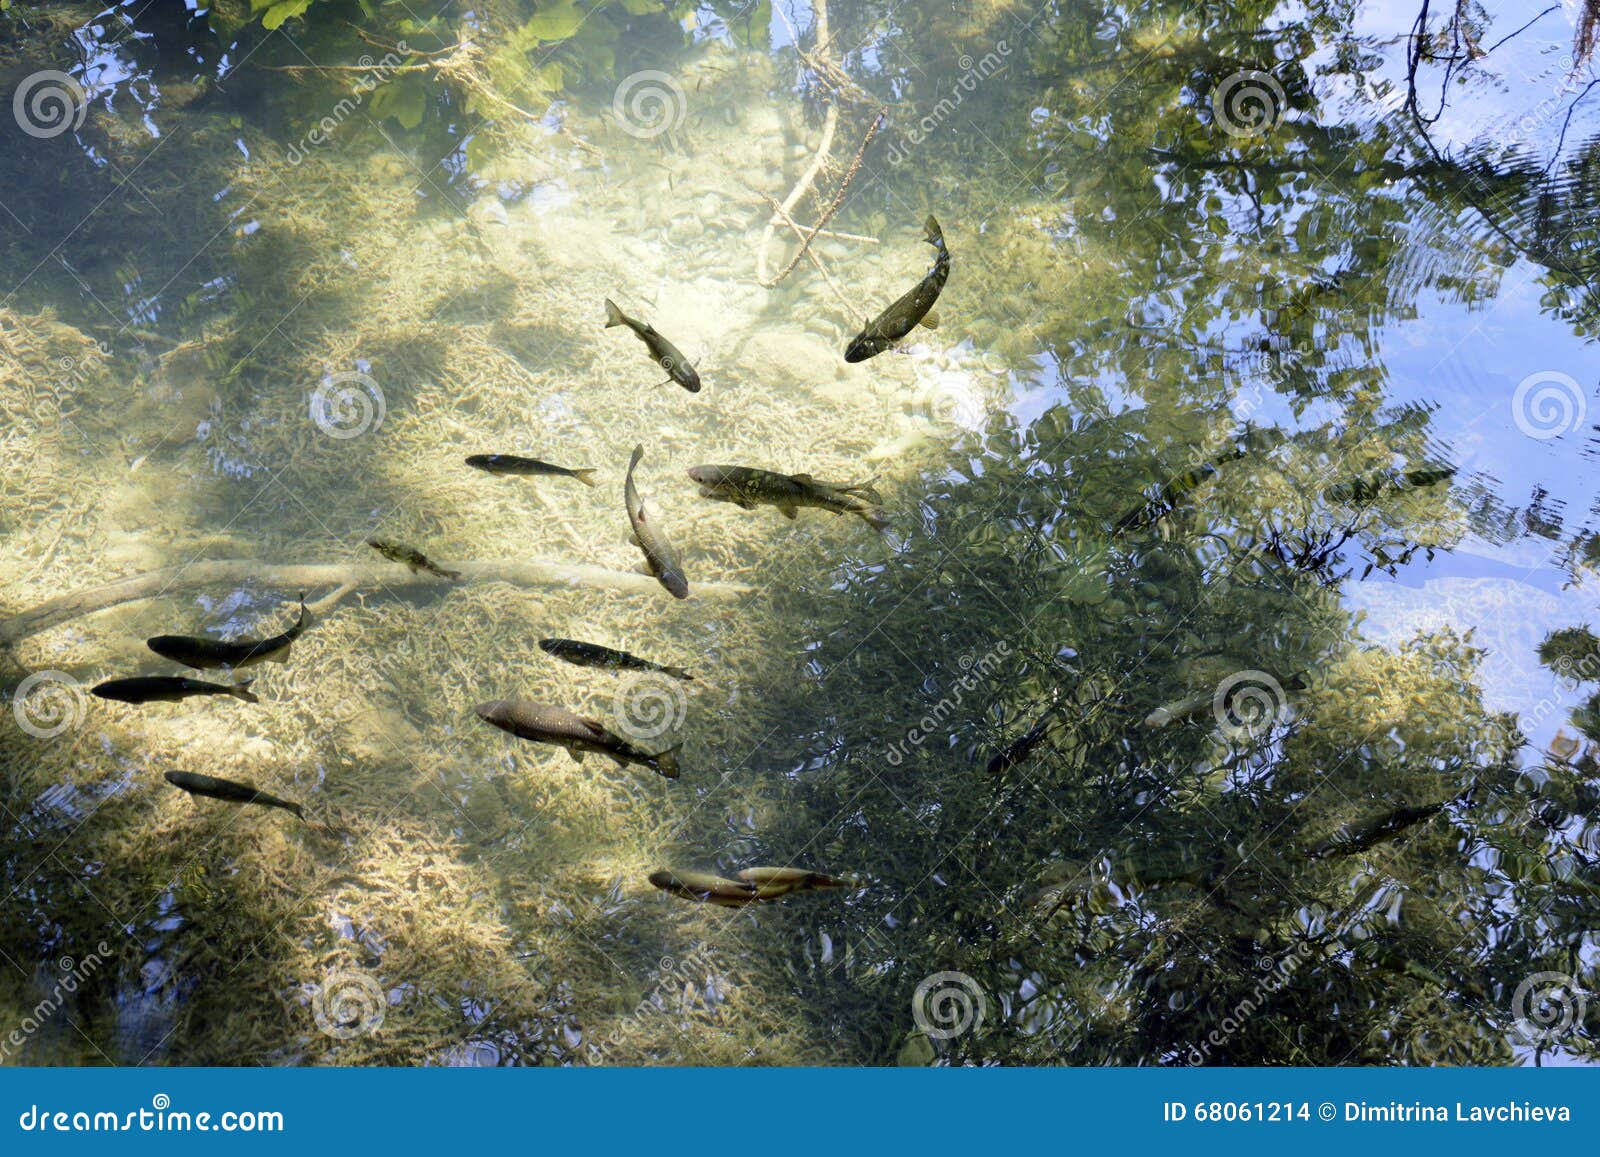 trout fish in limpid water